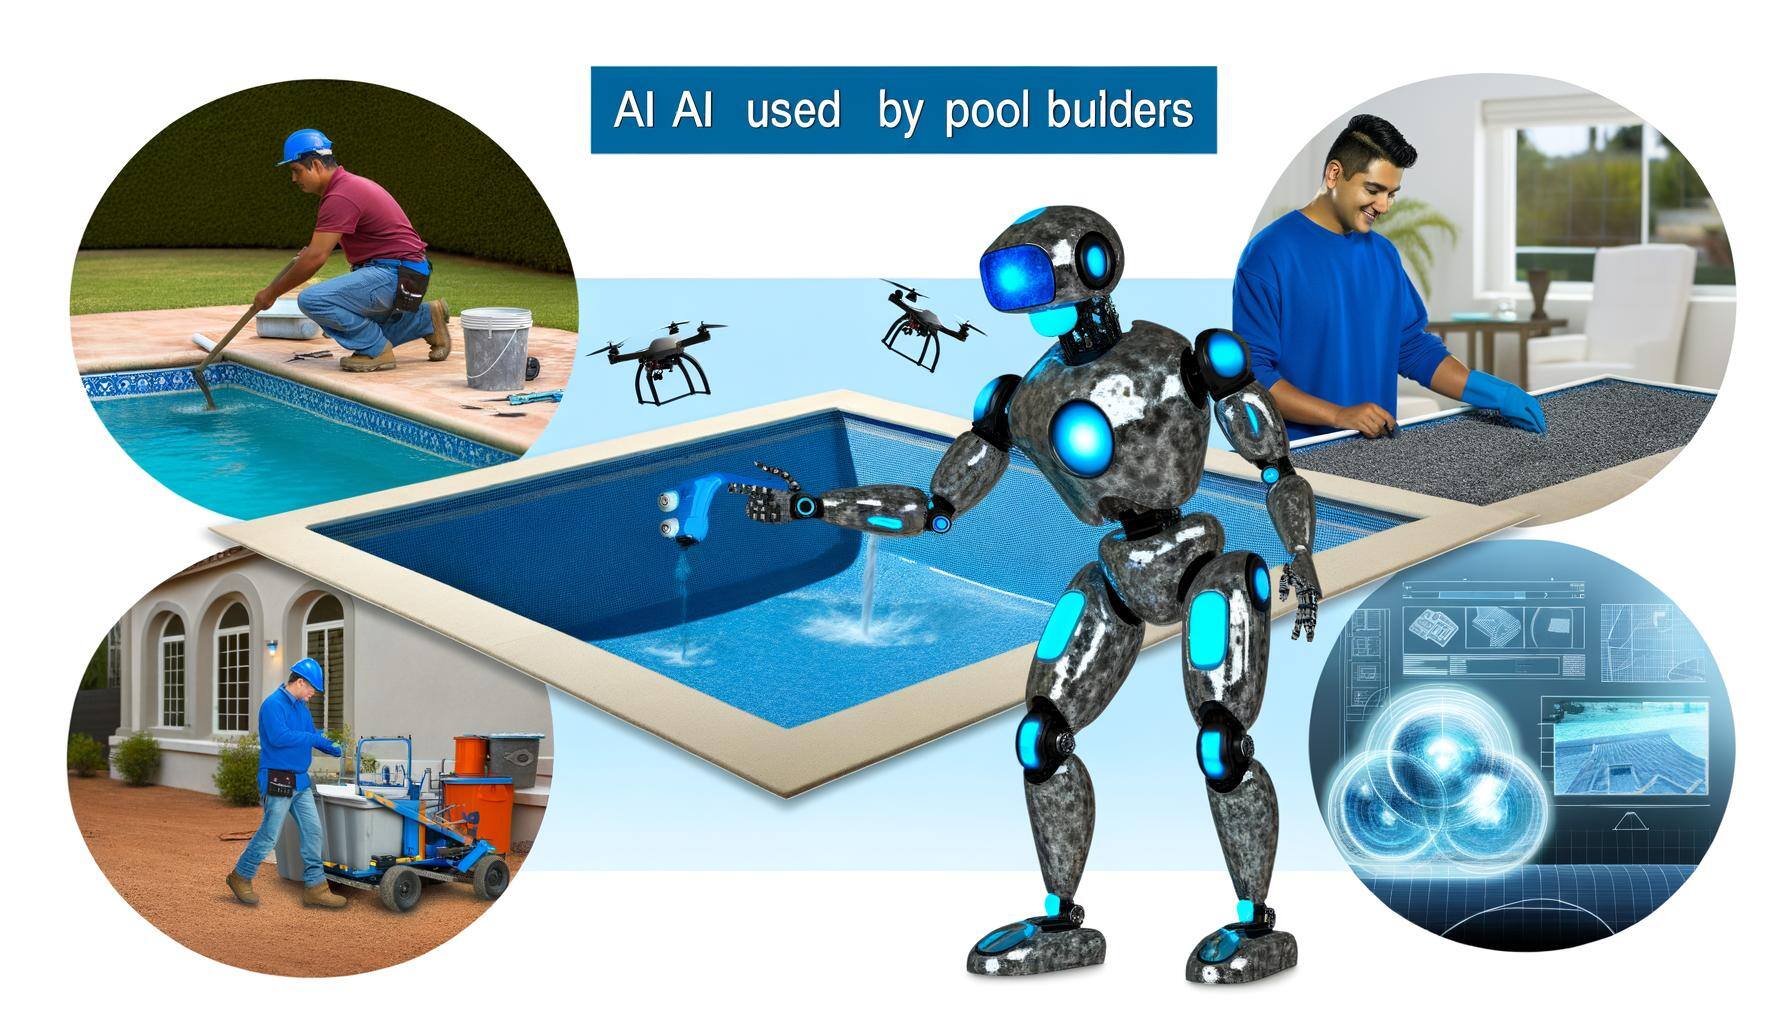 Future Trends in AI for Pool Builders